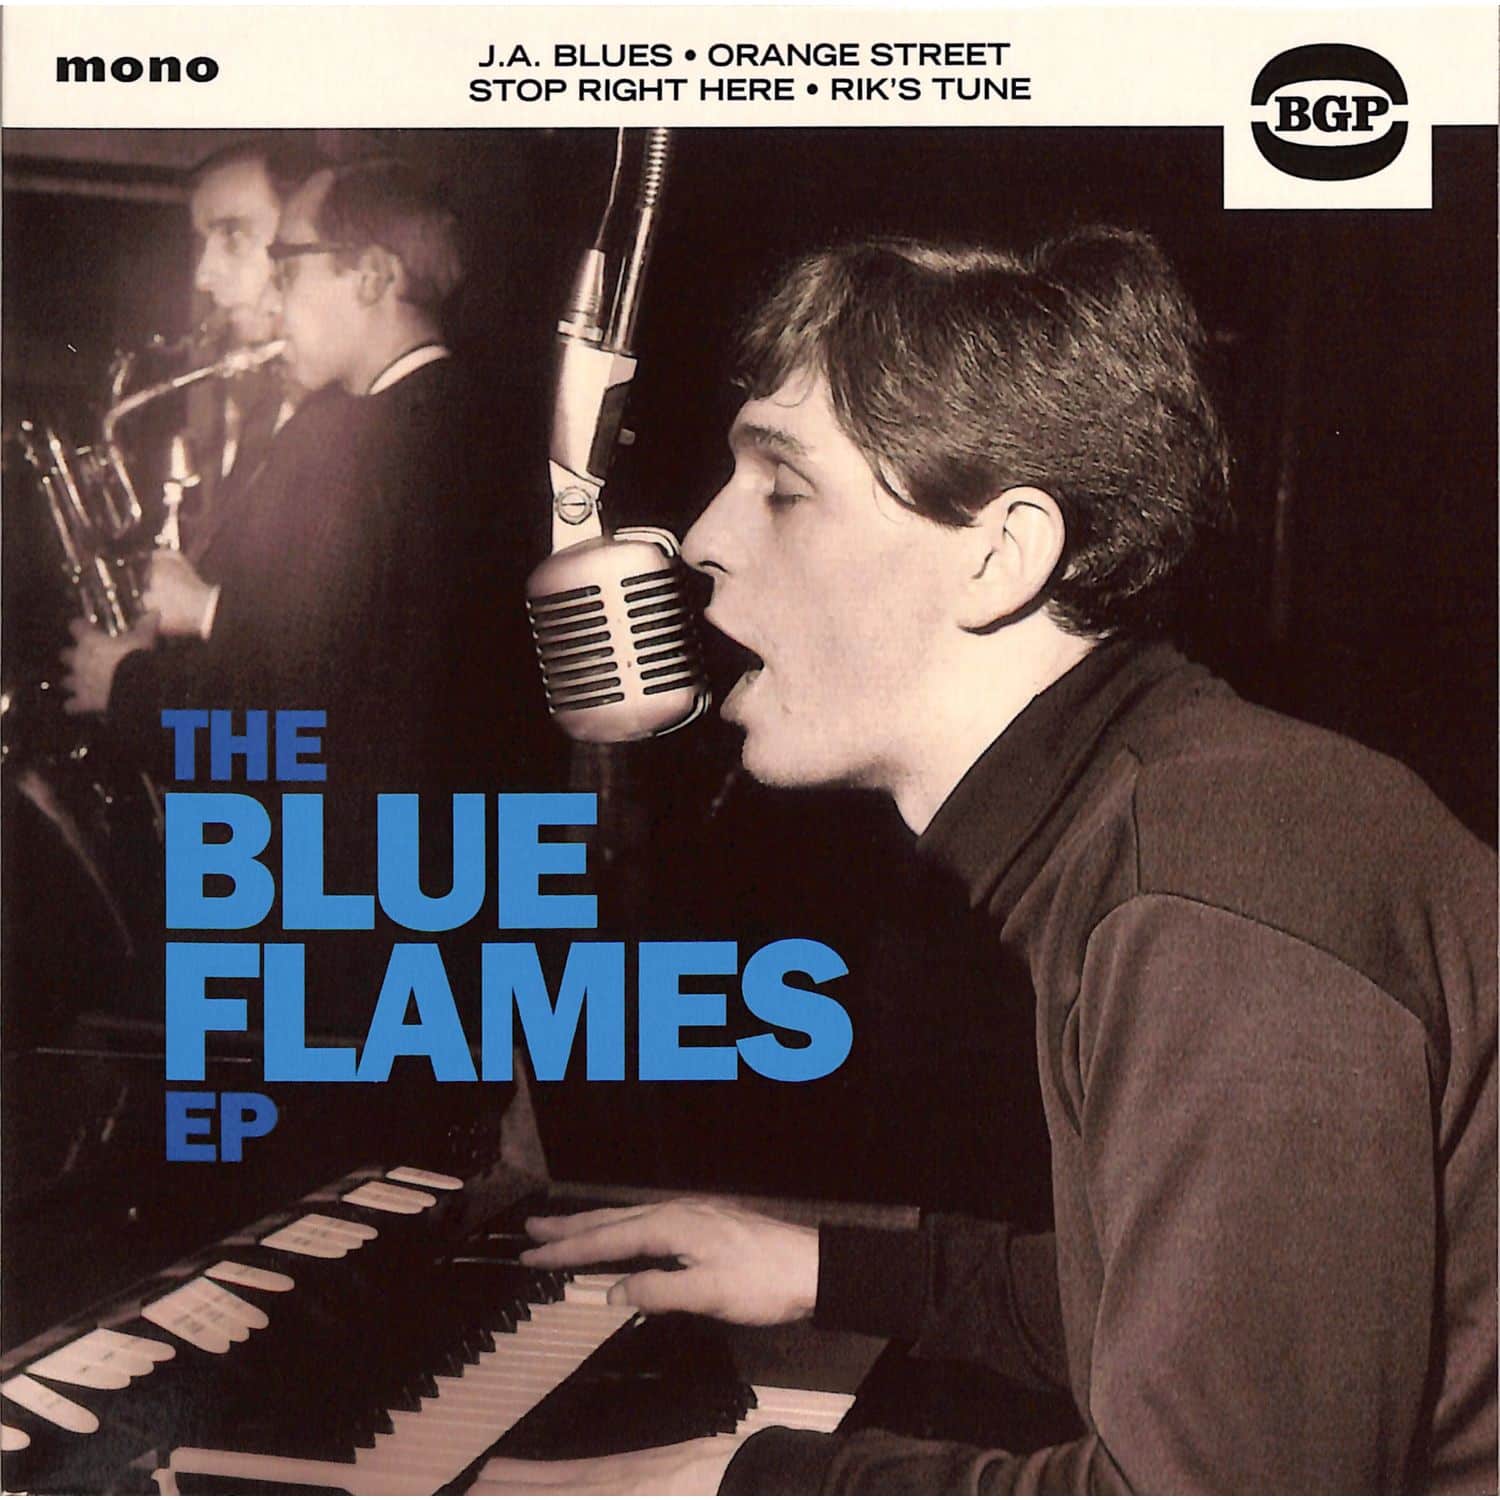  The Blue Flames - THE BLUE FLAMES EP 